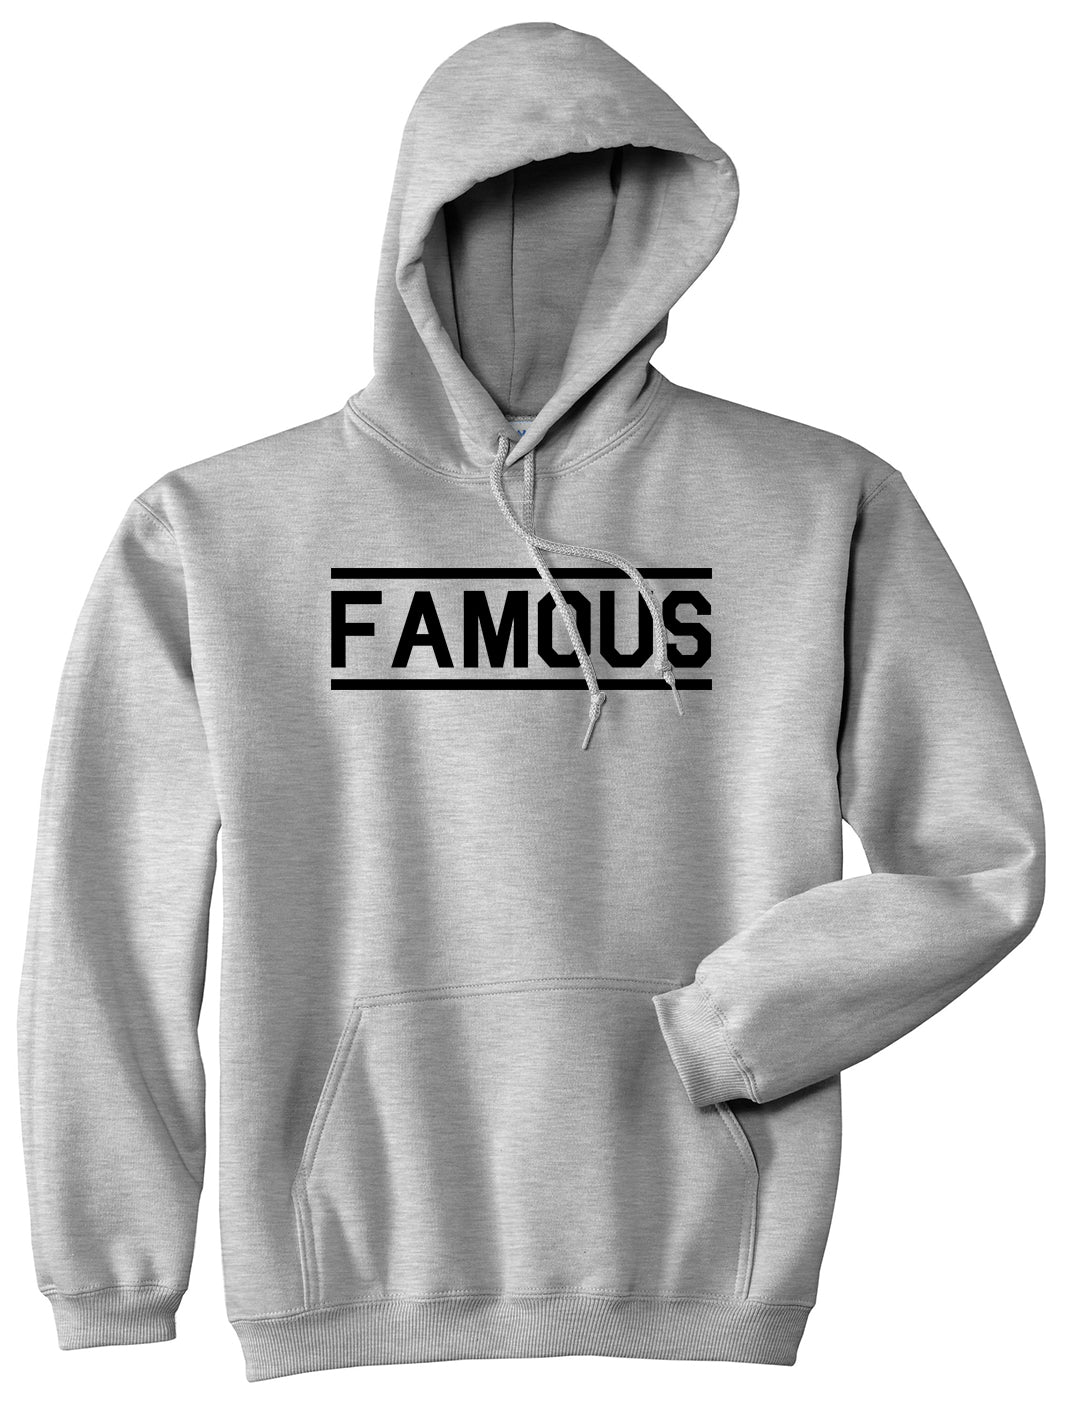 Famous Mens Grey Pullover Hoodie by KINGS OF NY